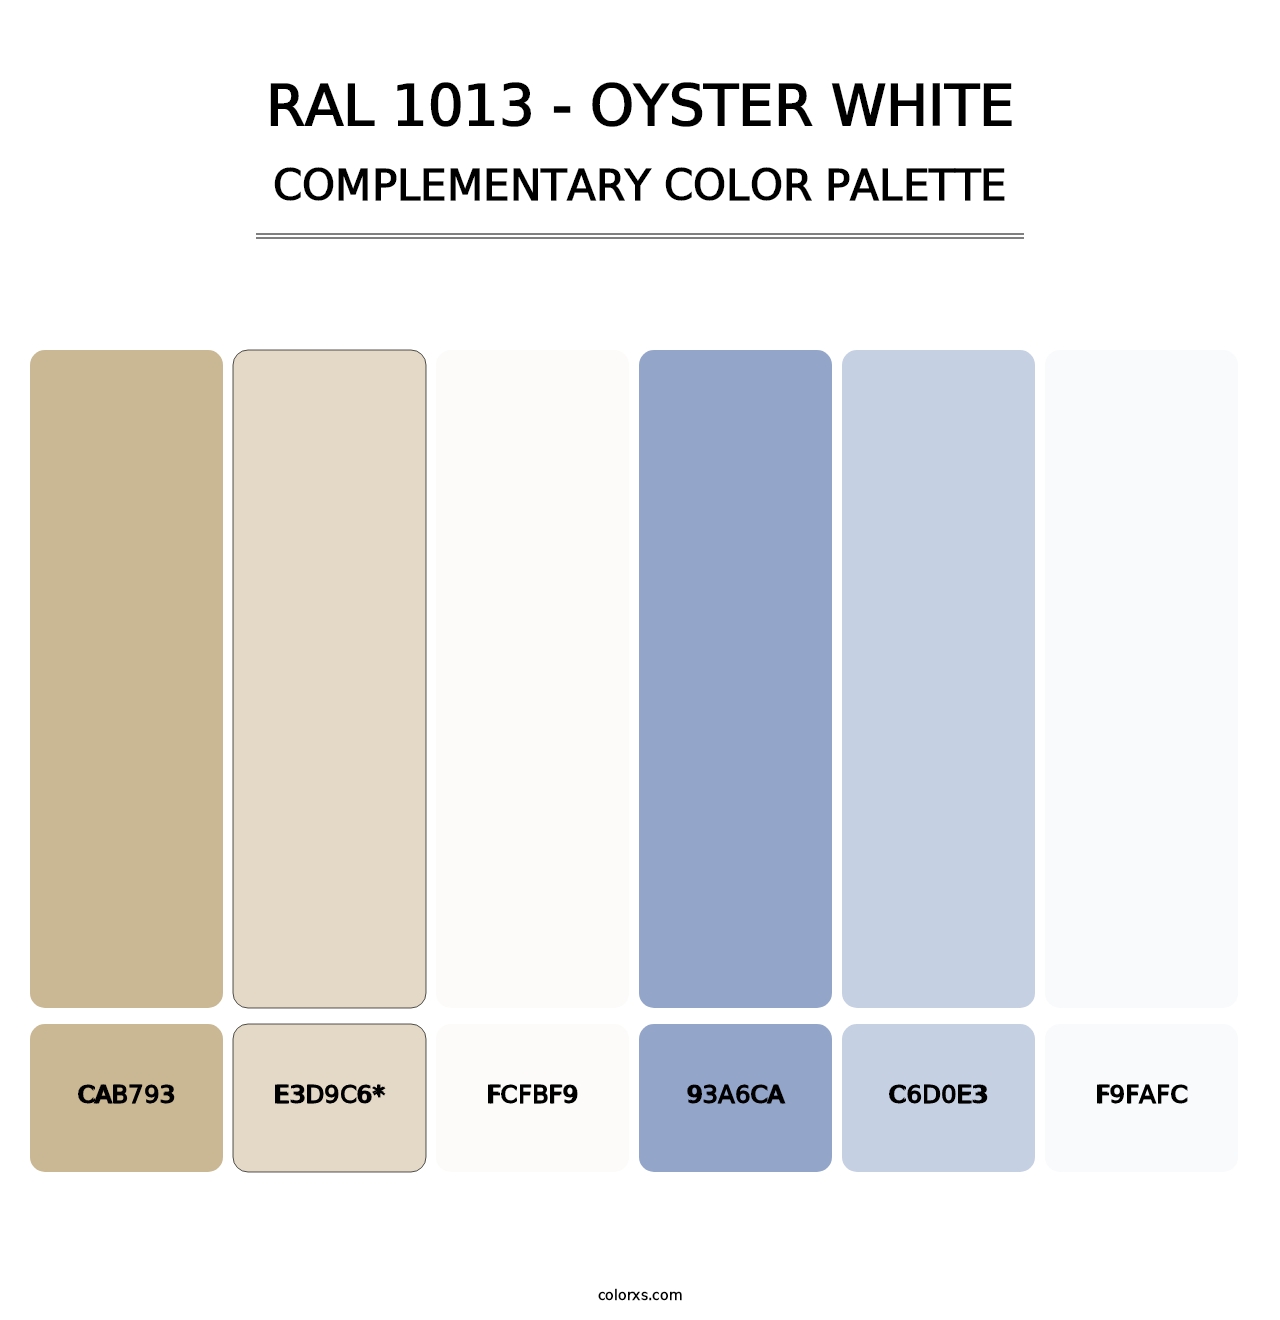 RAL 1013 - Oyster White - Complementary Color Palette